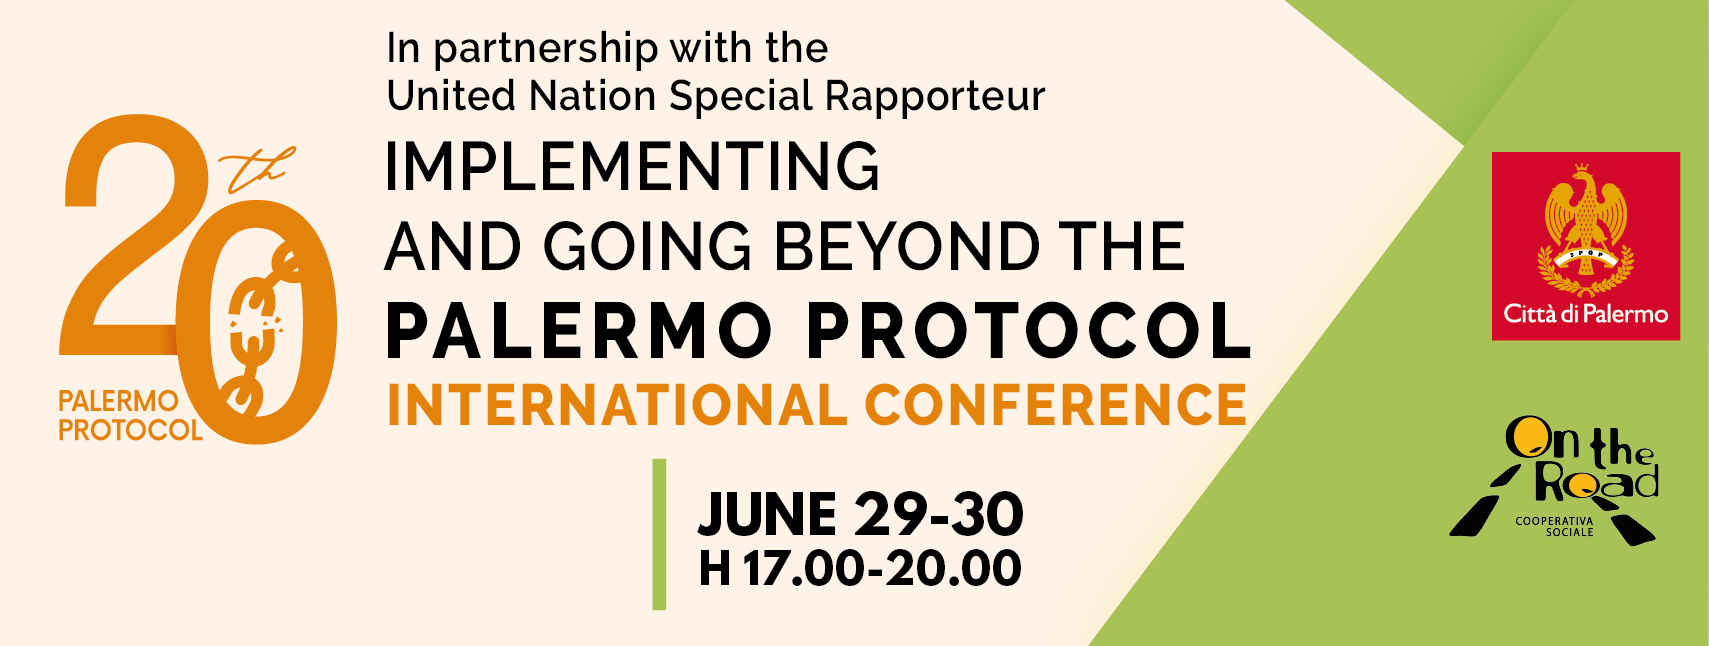 International Conference | Implementing and going beyond the Palermo Protocol 29-30 giugno